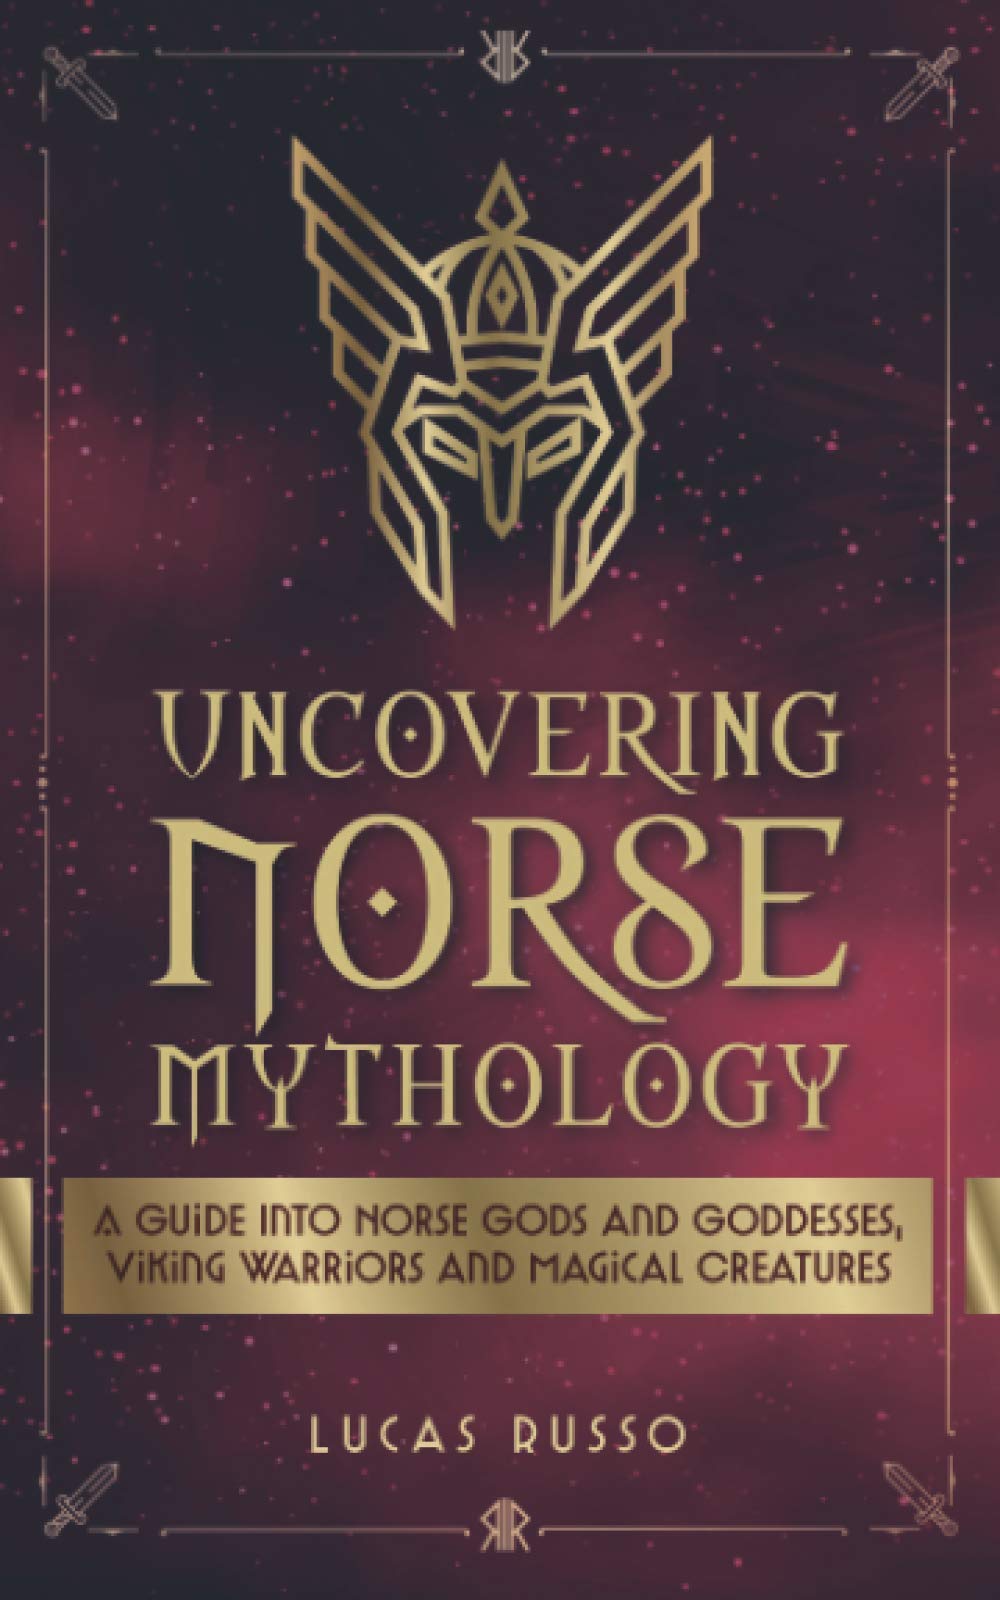 Uncovering Norse Mythology: A Guide Into Norse Gods and Goddesses, Viking Warriors and Magical Creatures (Mythology Collection)